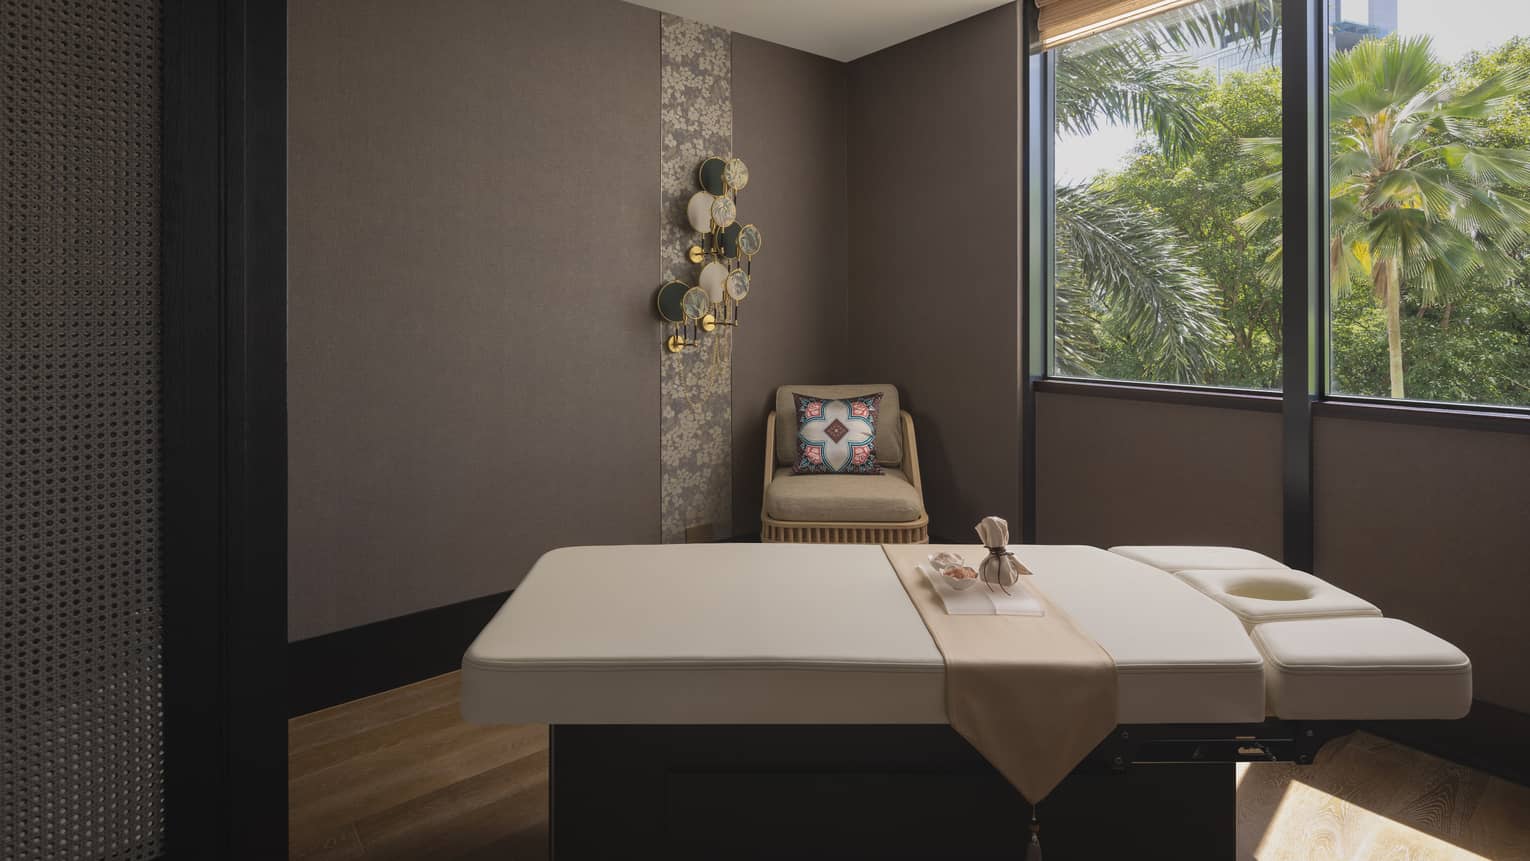 massage table with a view of the jungle outside the window